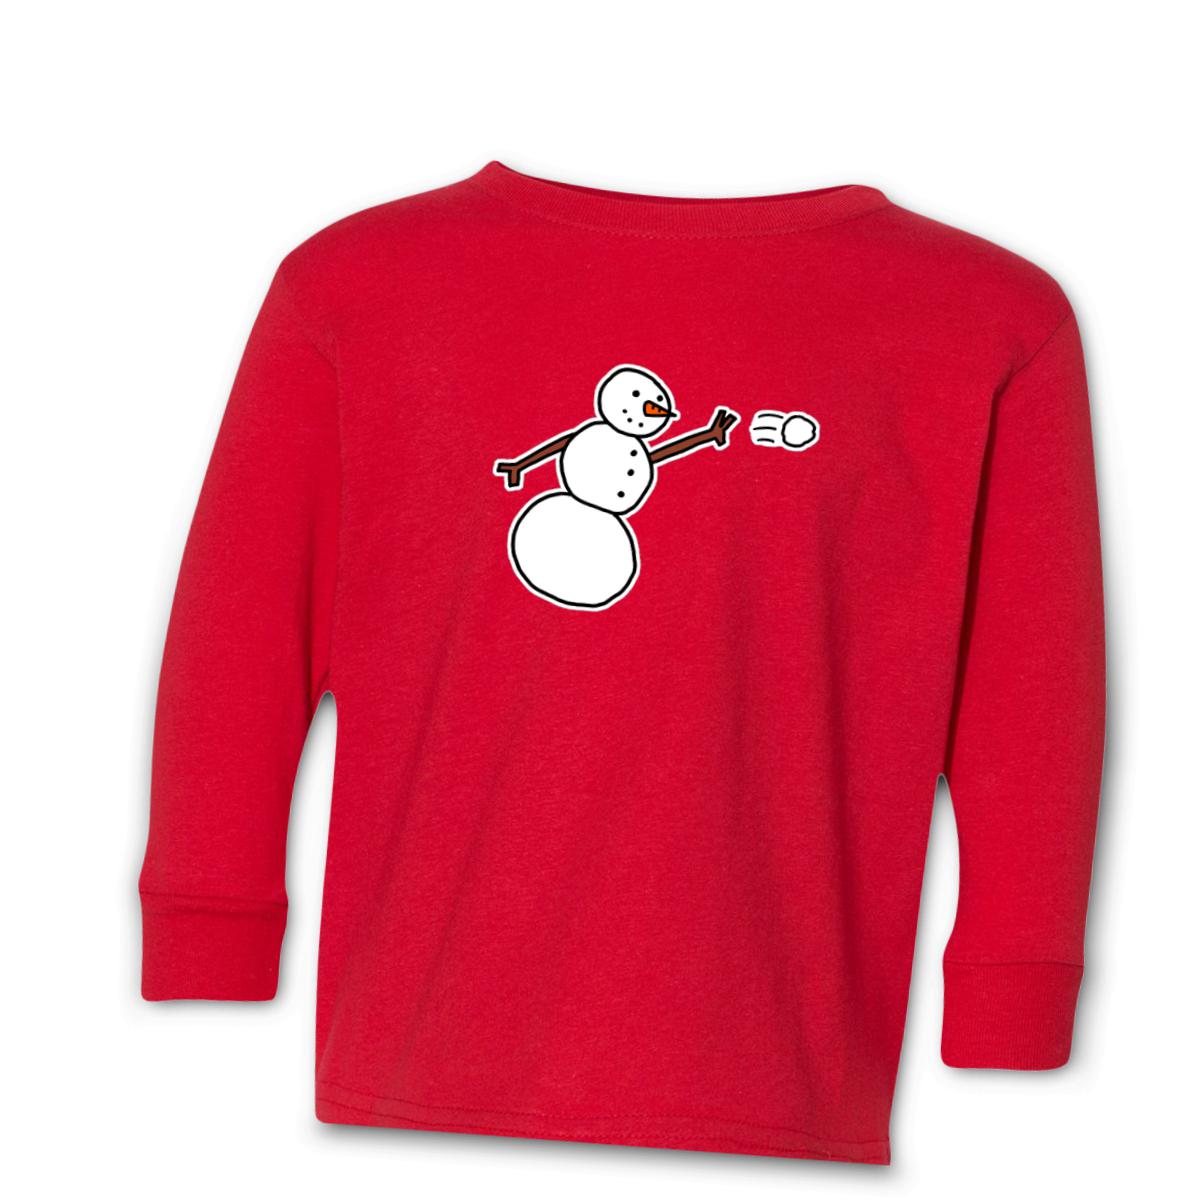 Snowman Throwing Snowball Toddler Long Sleeve Tee 2T red